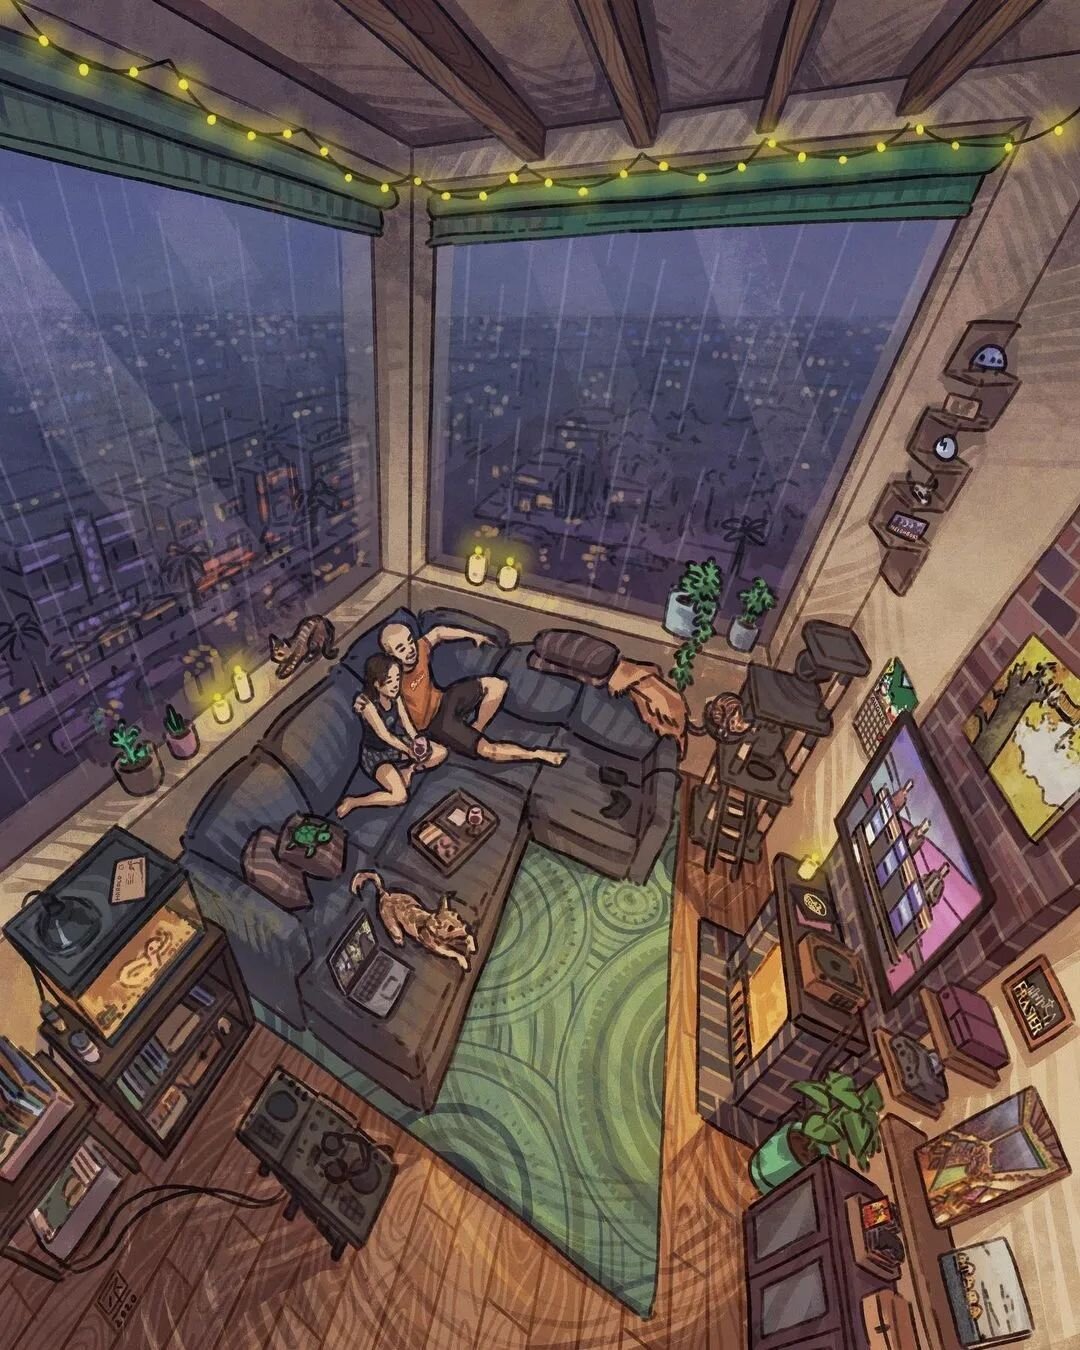 Rainy Nights, 2020 ~ Throwback commission to this cozy rainy home 😊 Not often do I get to create rainy pieces, but when I do it's always a fun change of pace. There's something extra nice and comfortable when you got that rain ASMR tapping on the wi